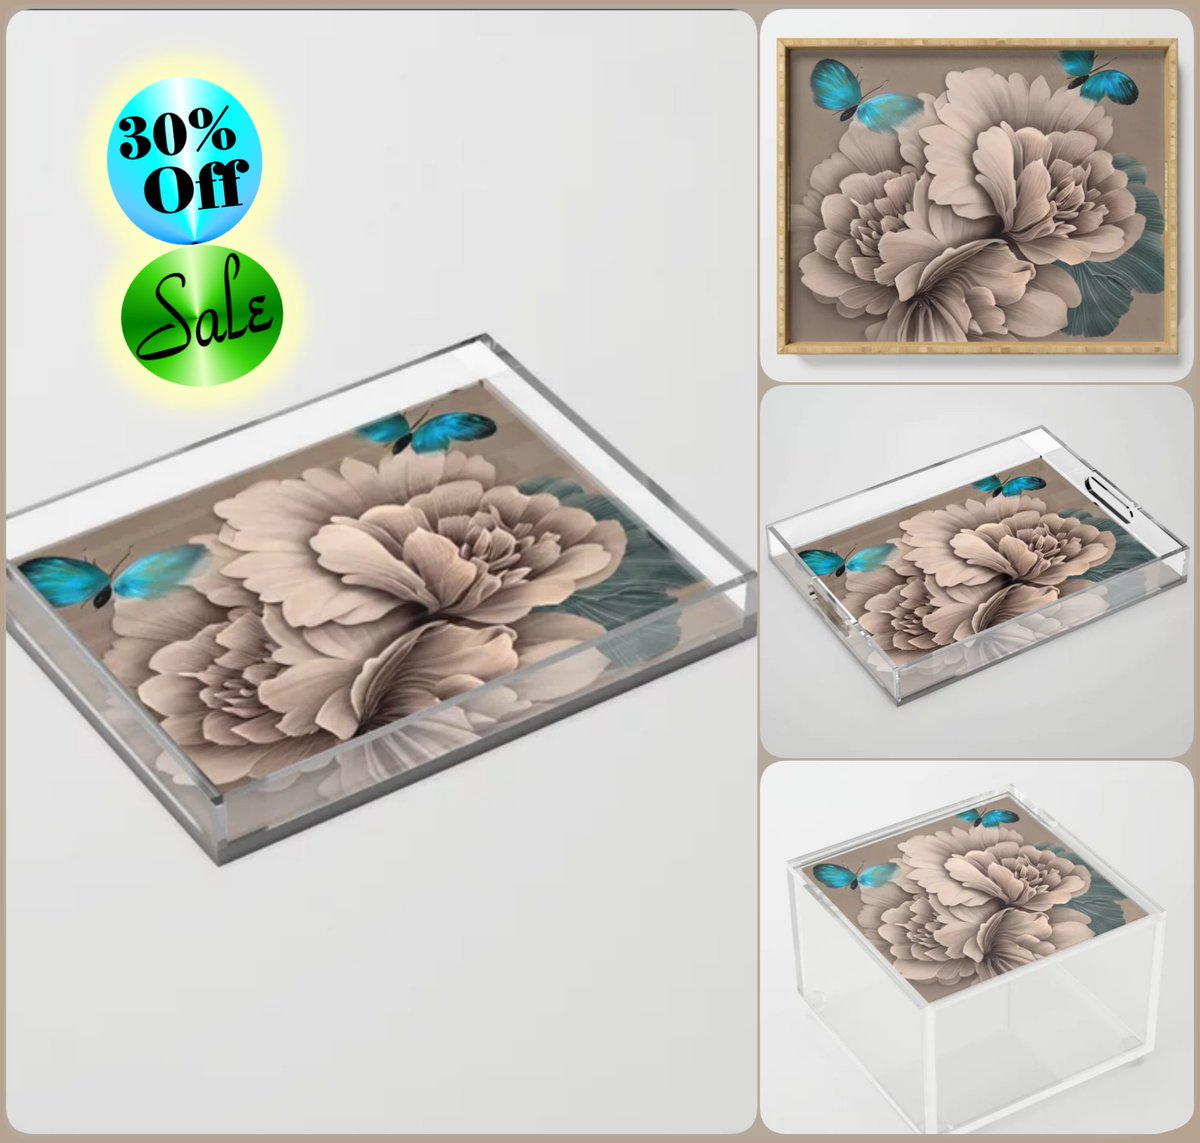 *SALE 30% Off* Blissful Hush Acrylic Tray~ by Art_Falaxy ~Art Exquisite!~ #coasters #gifts #trays #mugs #coffee #society6 #travel #artfalaxy #wrapping #art #accents #modern #trendy #wine #water #placemats #desk #office #puzzles #tablecloths #runners society6.com/product/blissf…